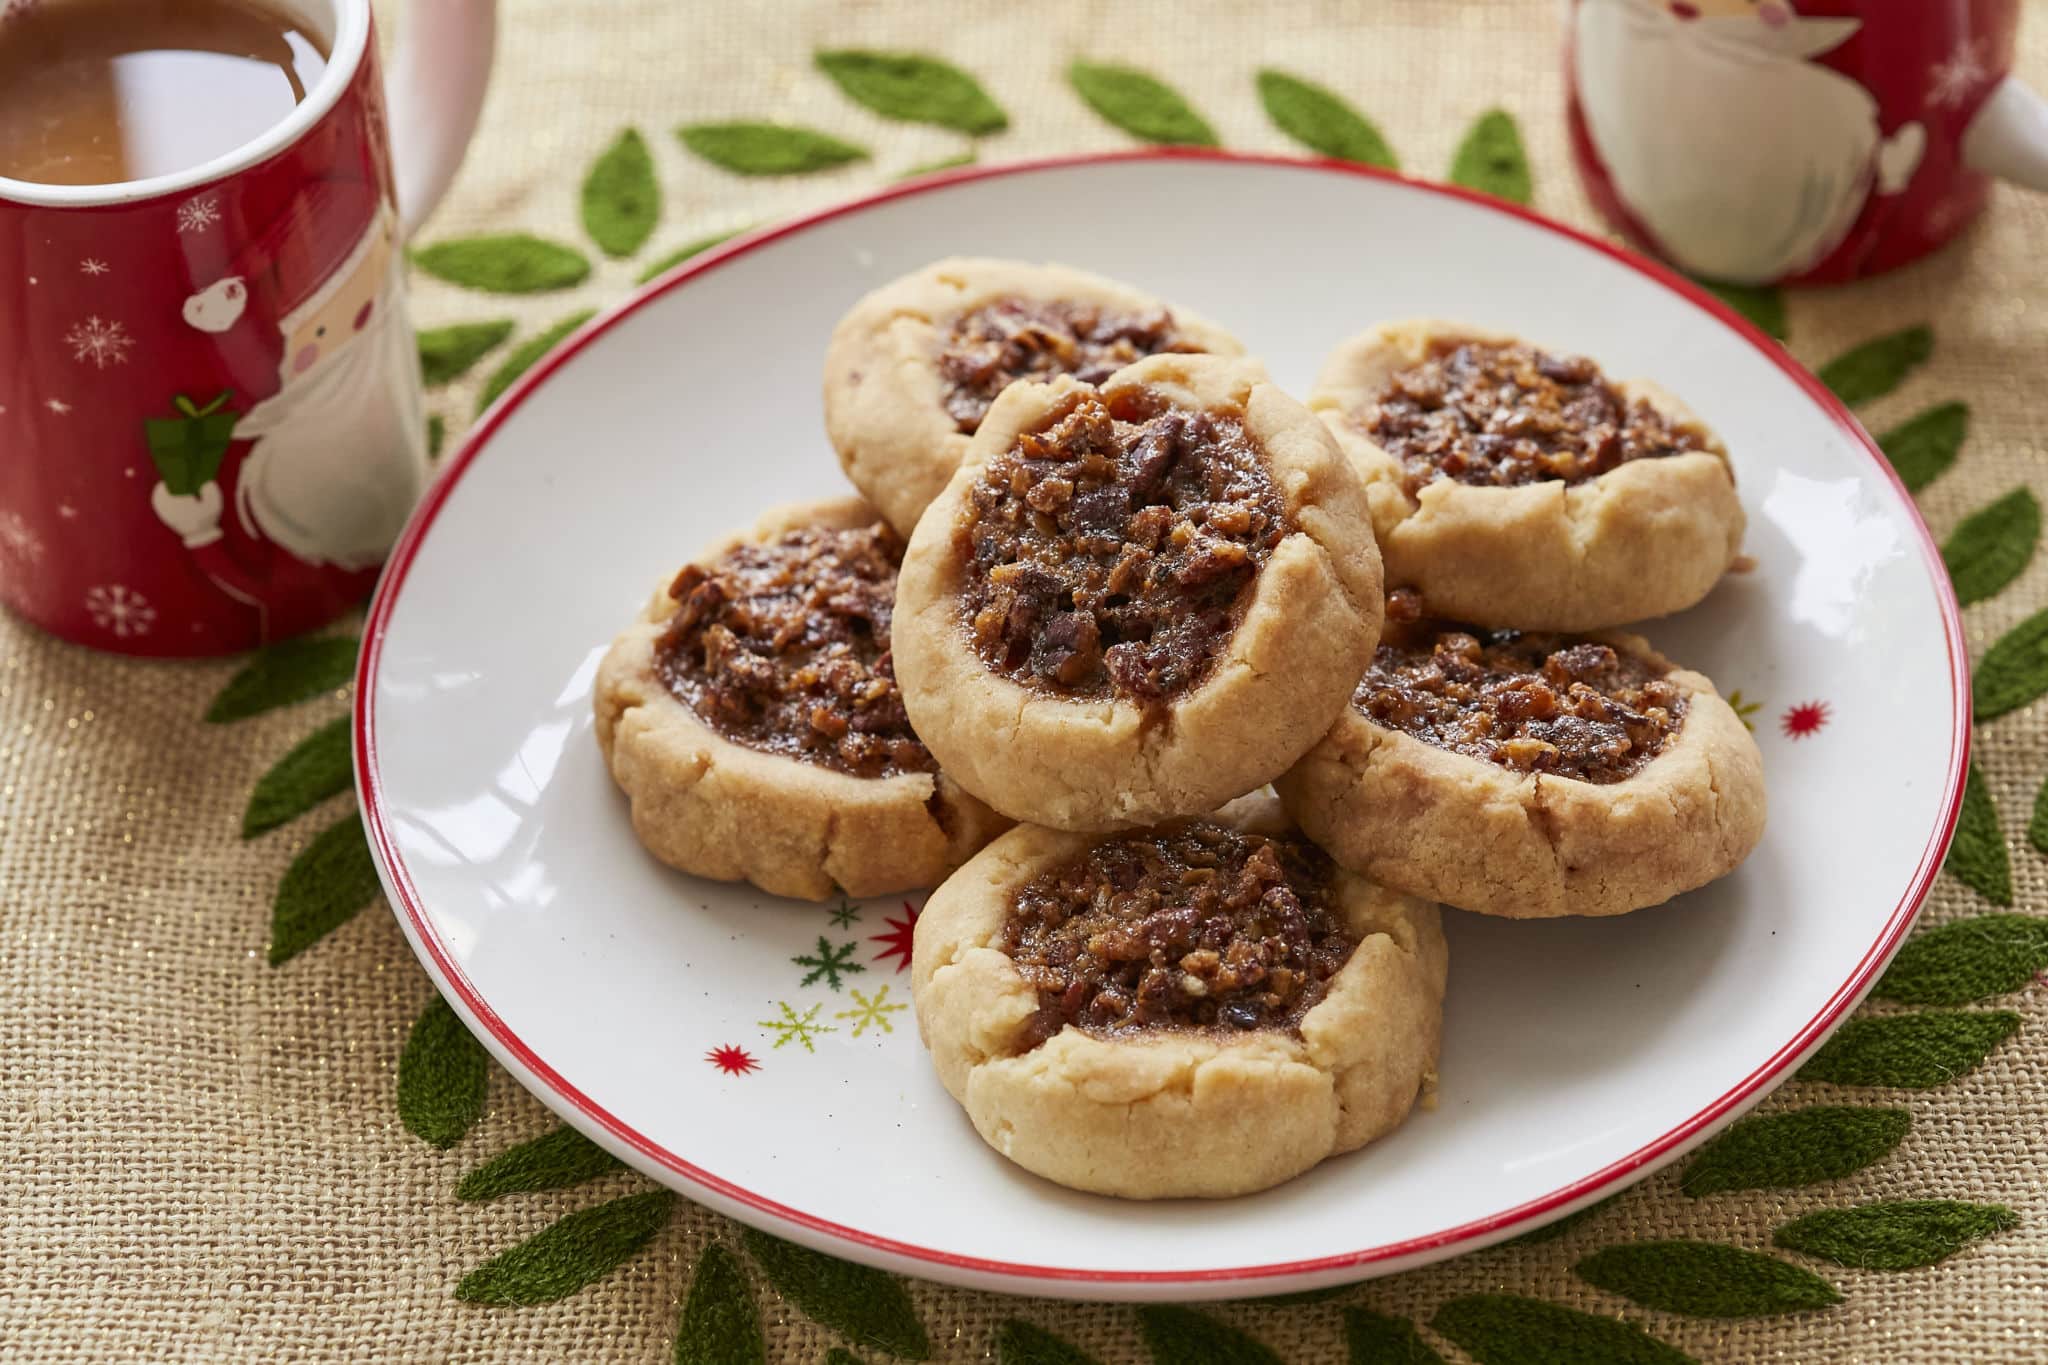 Homemade Pecan Pie Thumbprint Cookies are served on a white dish next to a mug of hot chocolate. The thumbprint cookies are dimpled in the middle and filled with a pecan pie filling.